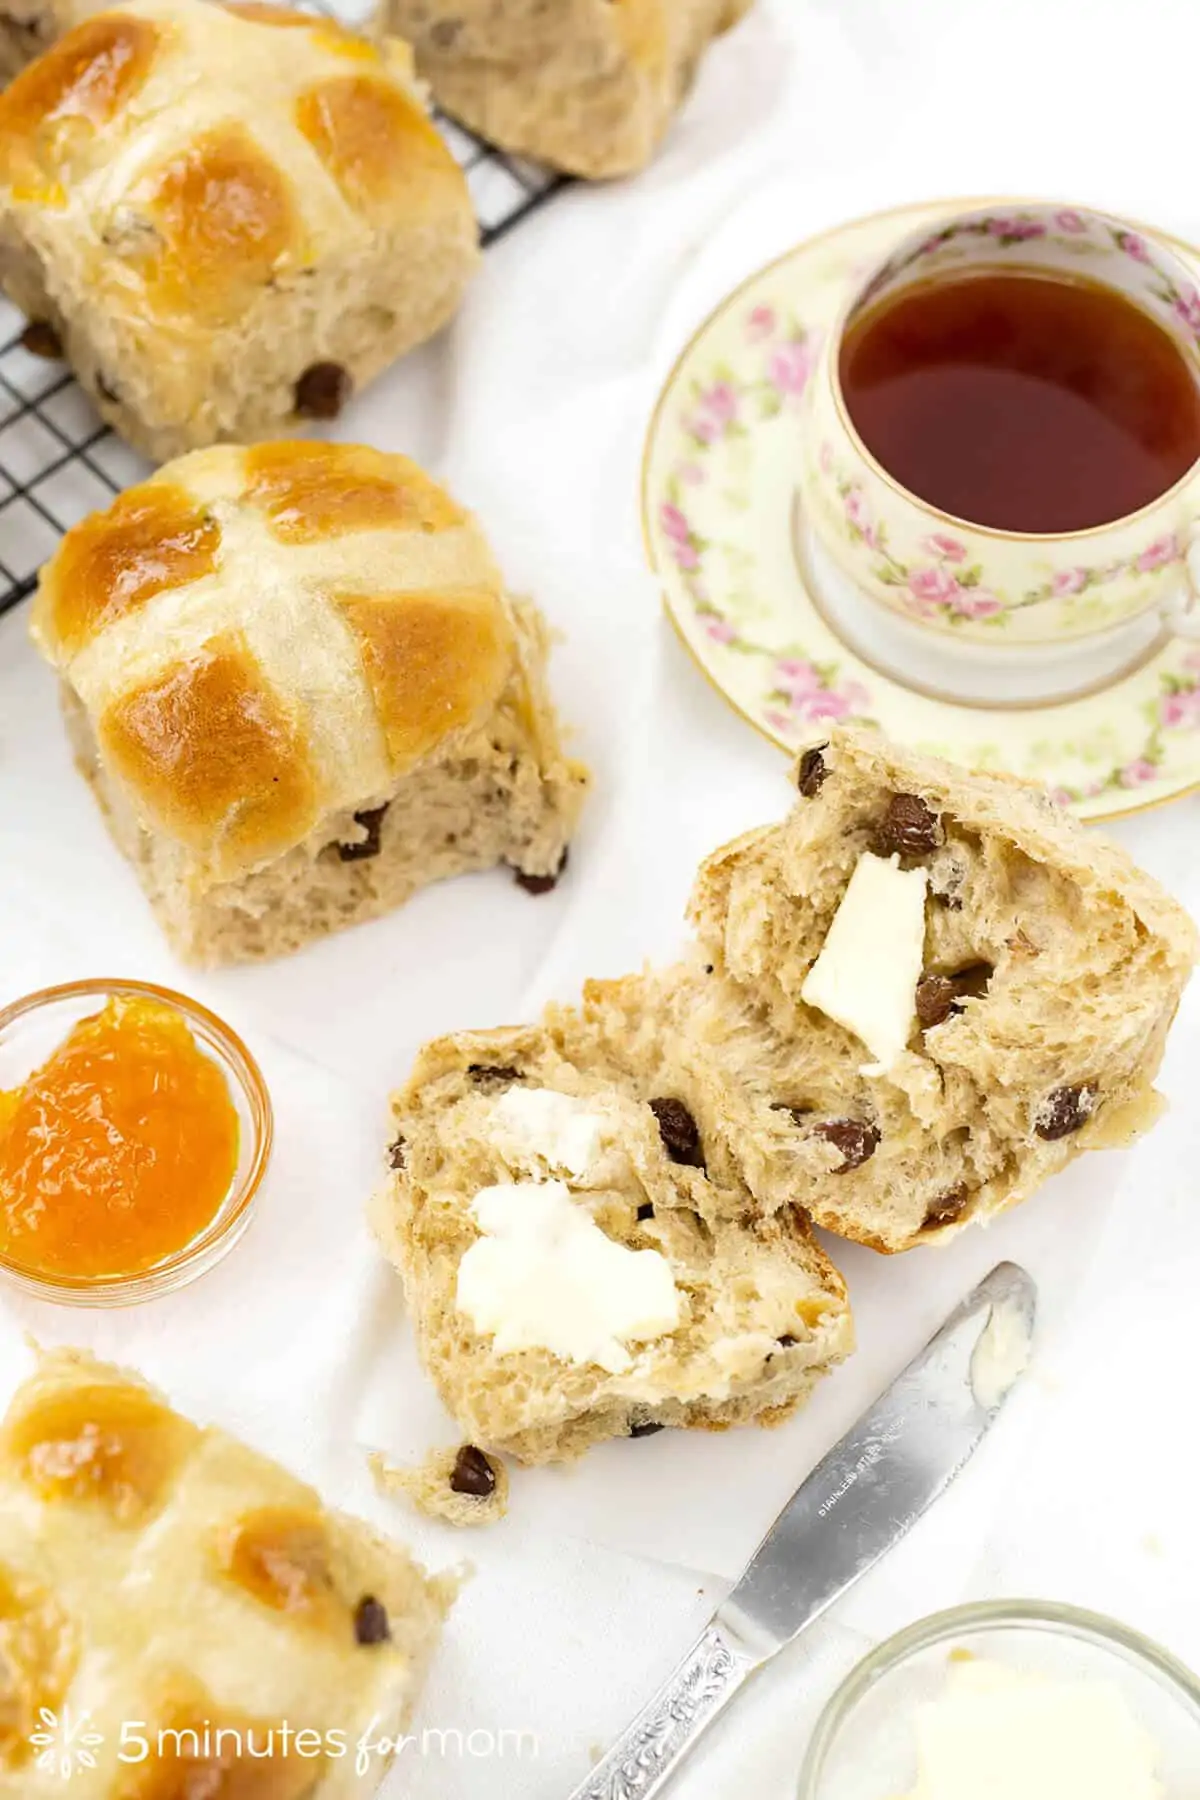 traditional hot cross buns served with butter and a cup of tea